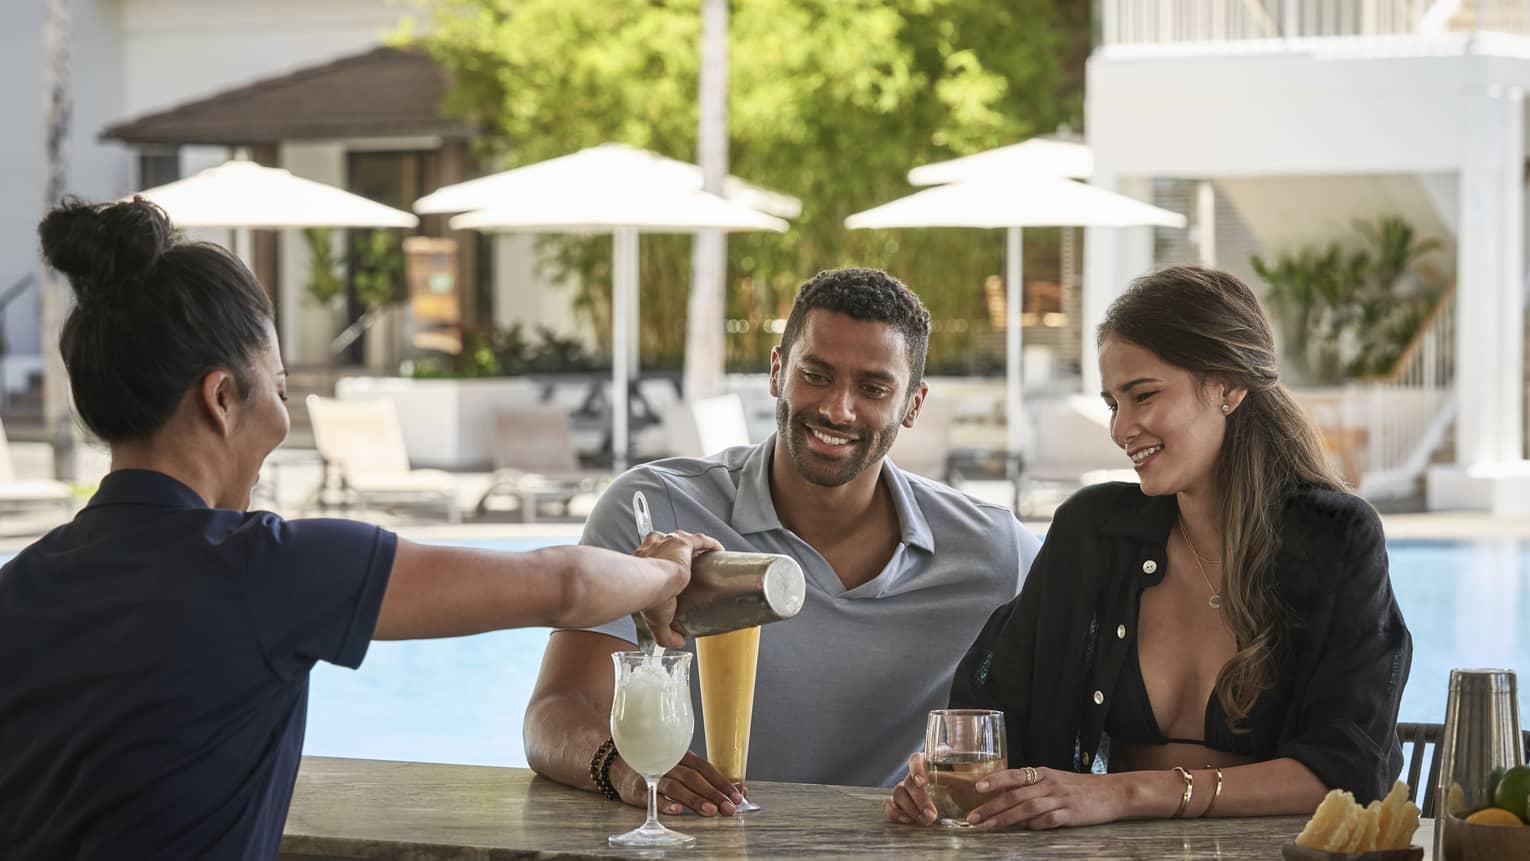 Female bartender pours a tropical drink for man and woman at poolside bar